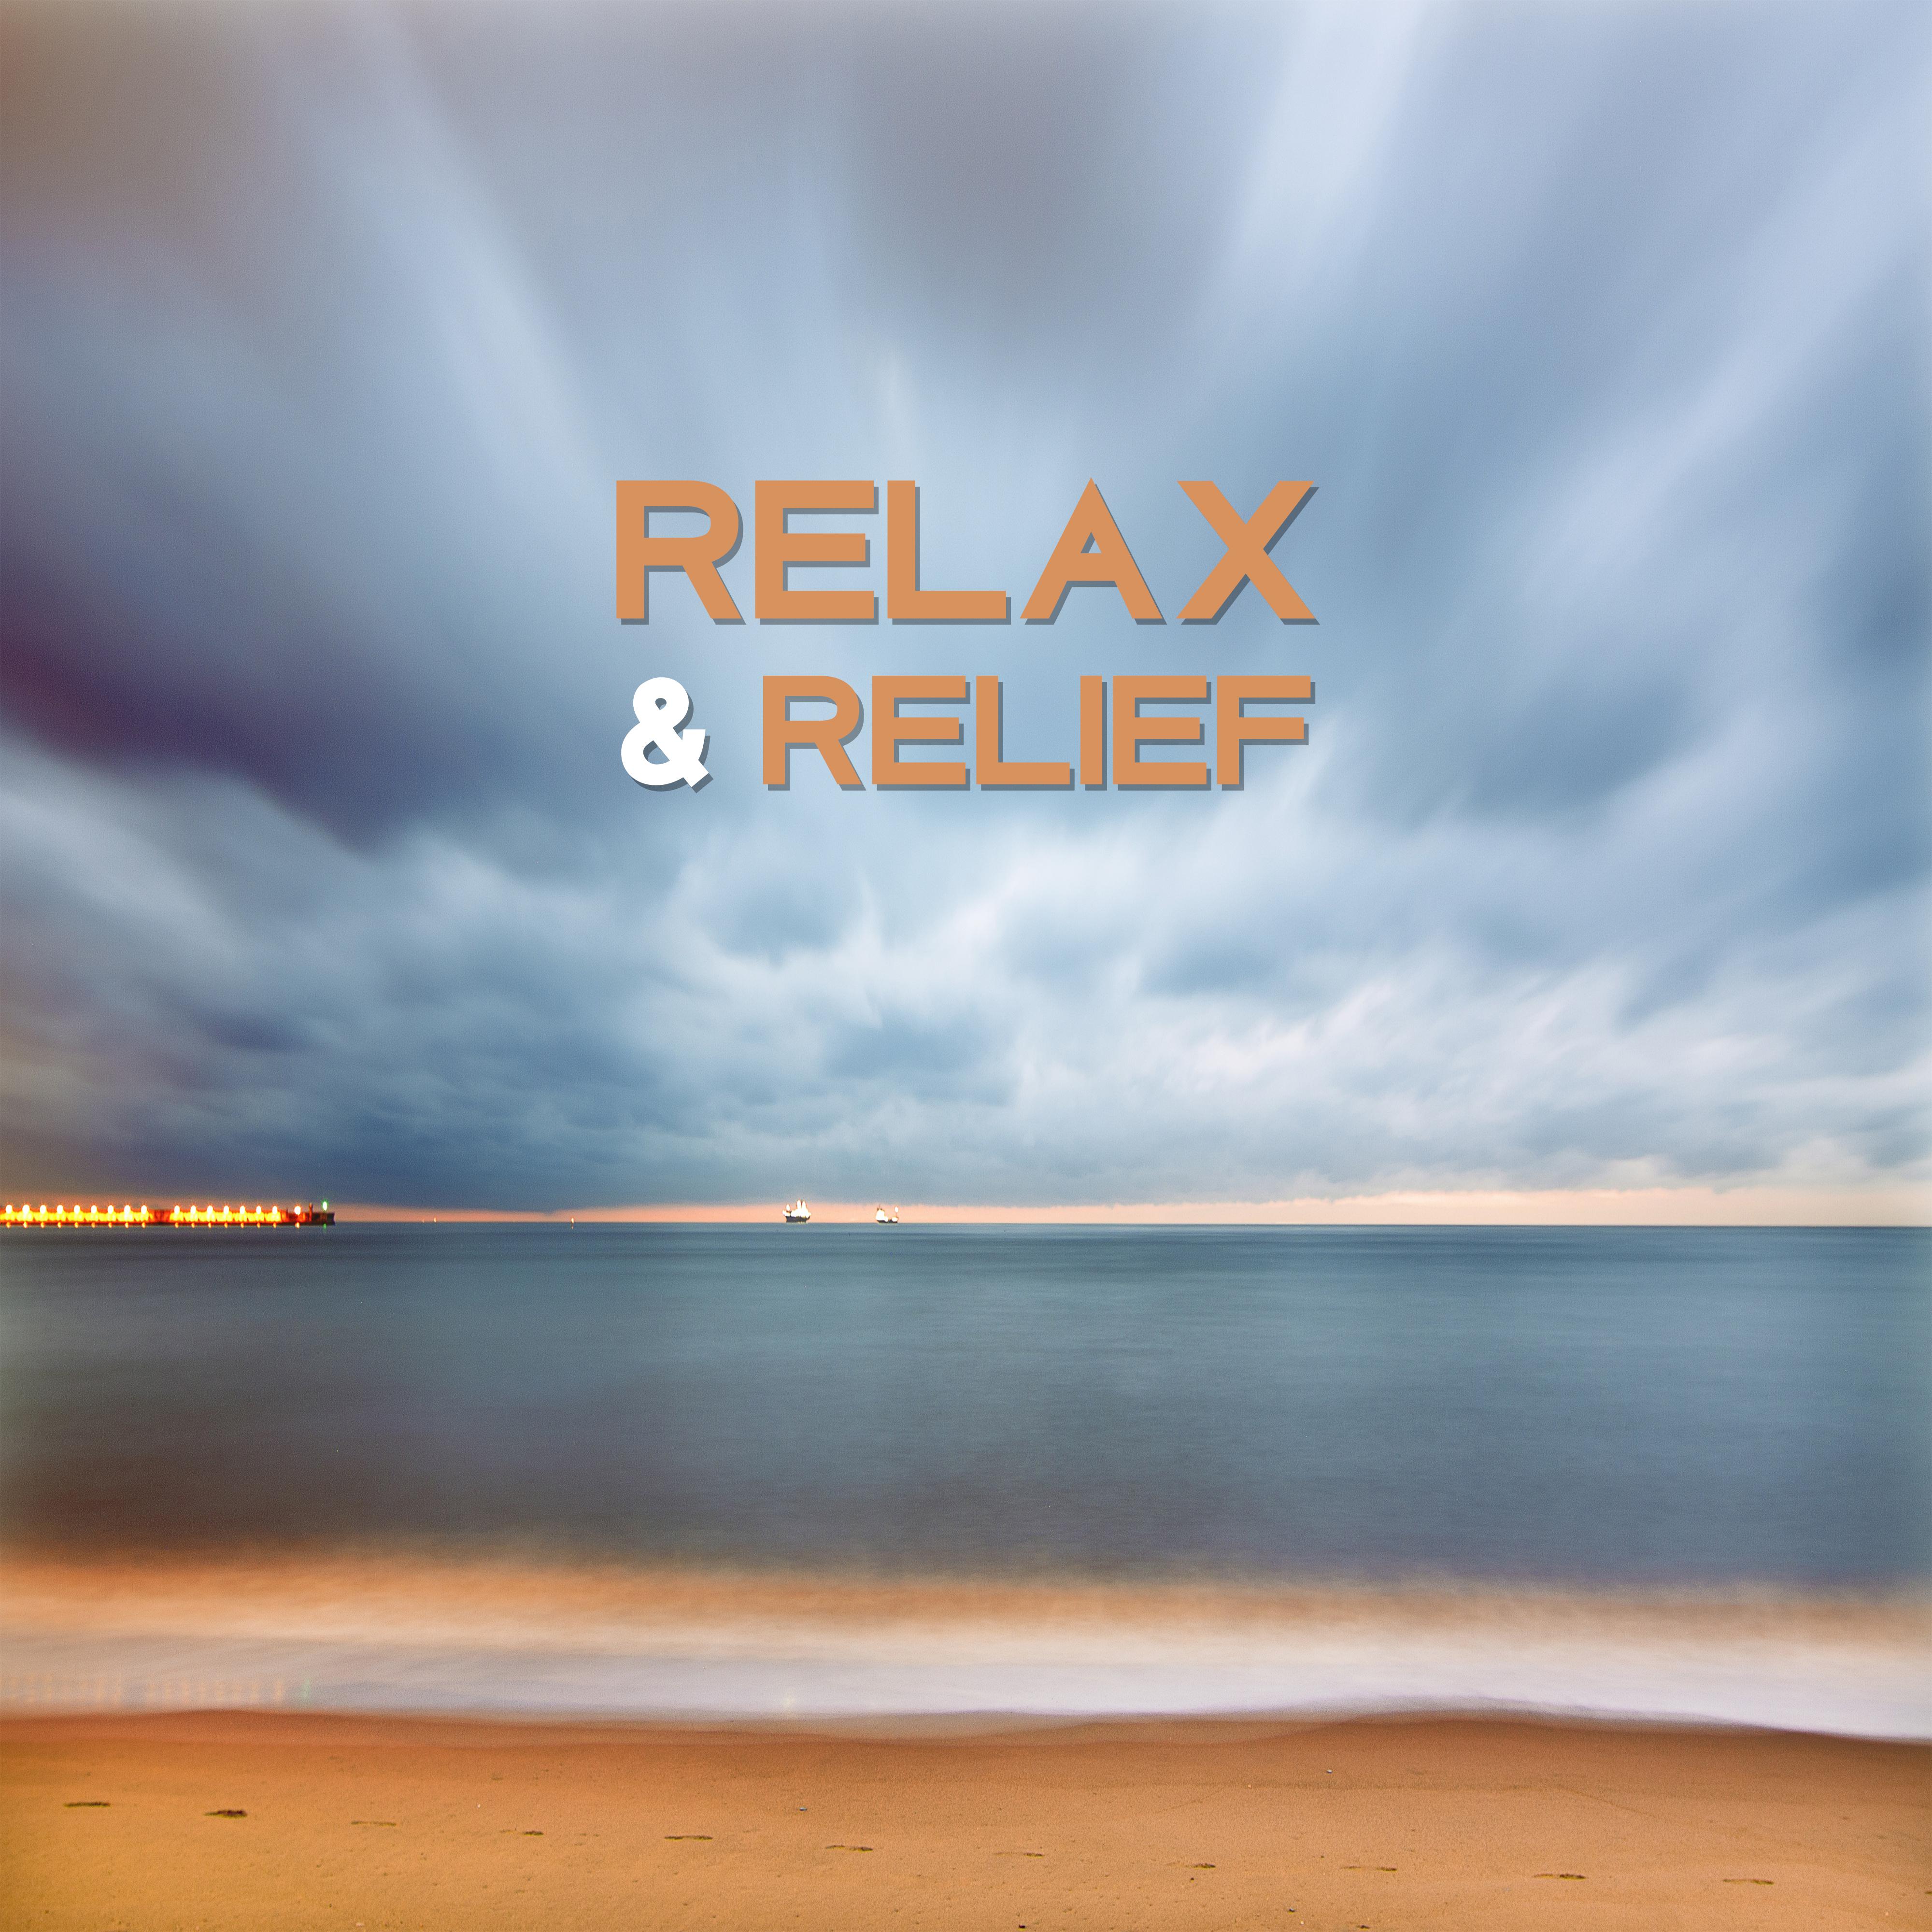 Relax  Relief  Soft Nature Sounds for Relaxation, Music to Calm Down, Instrumental Songs to Rest, Pure Waves, Singing Birds, Zen